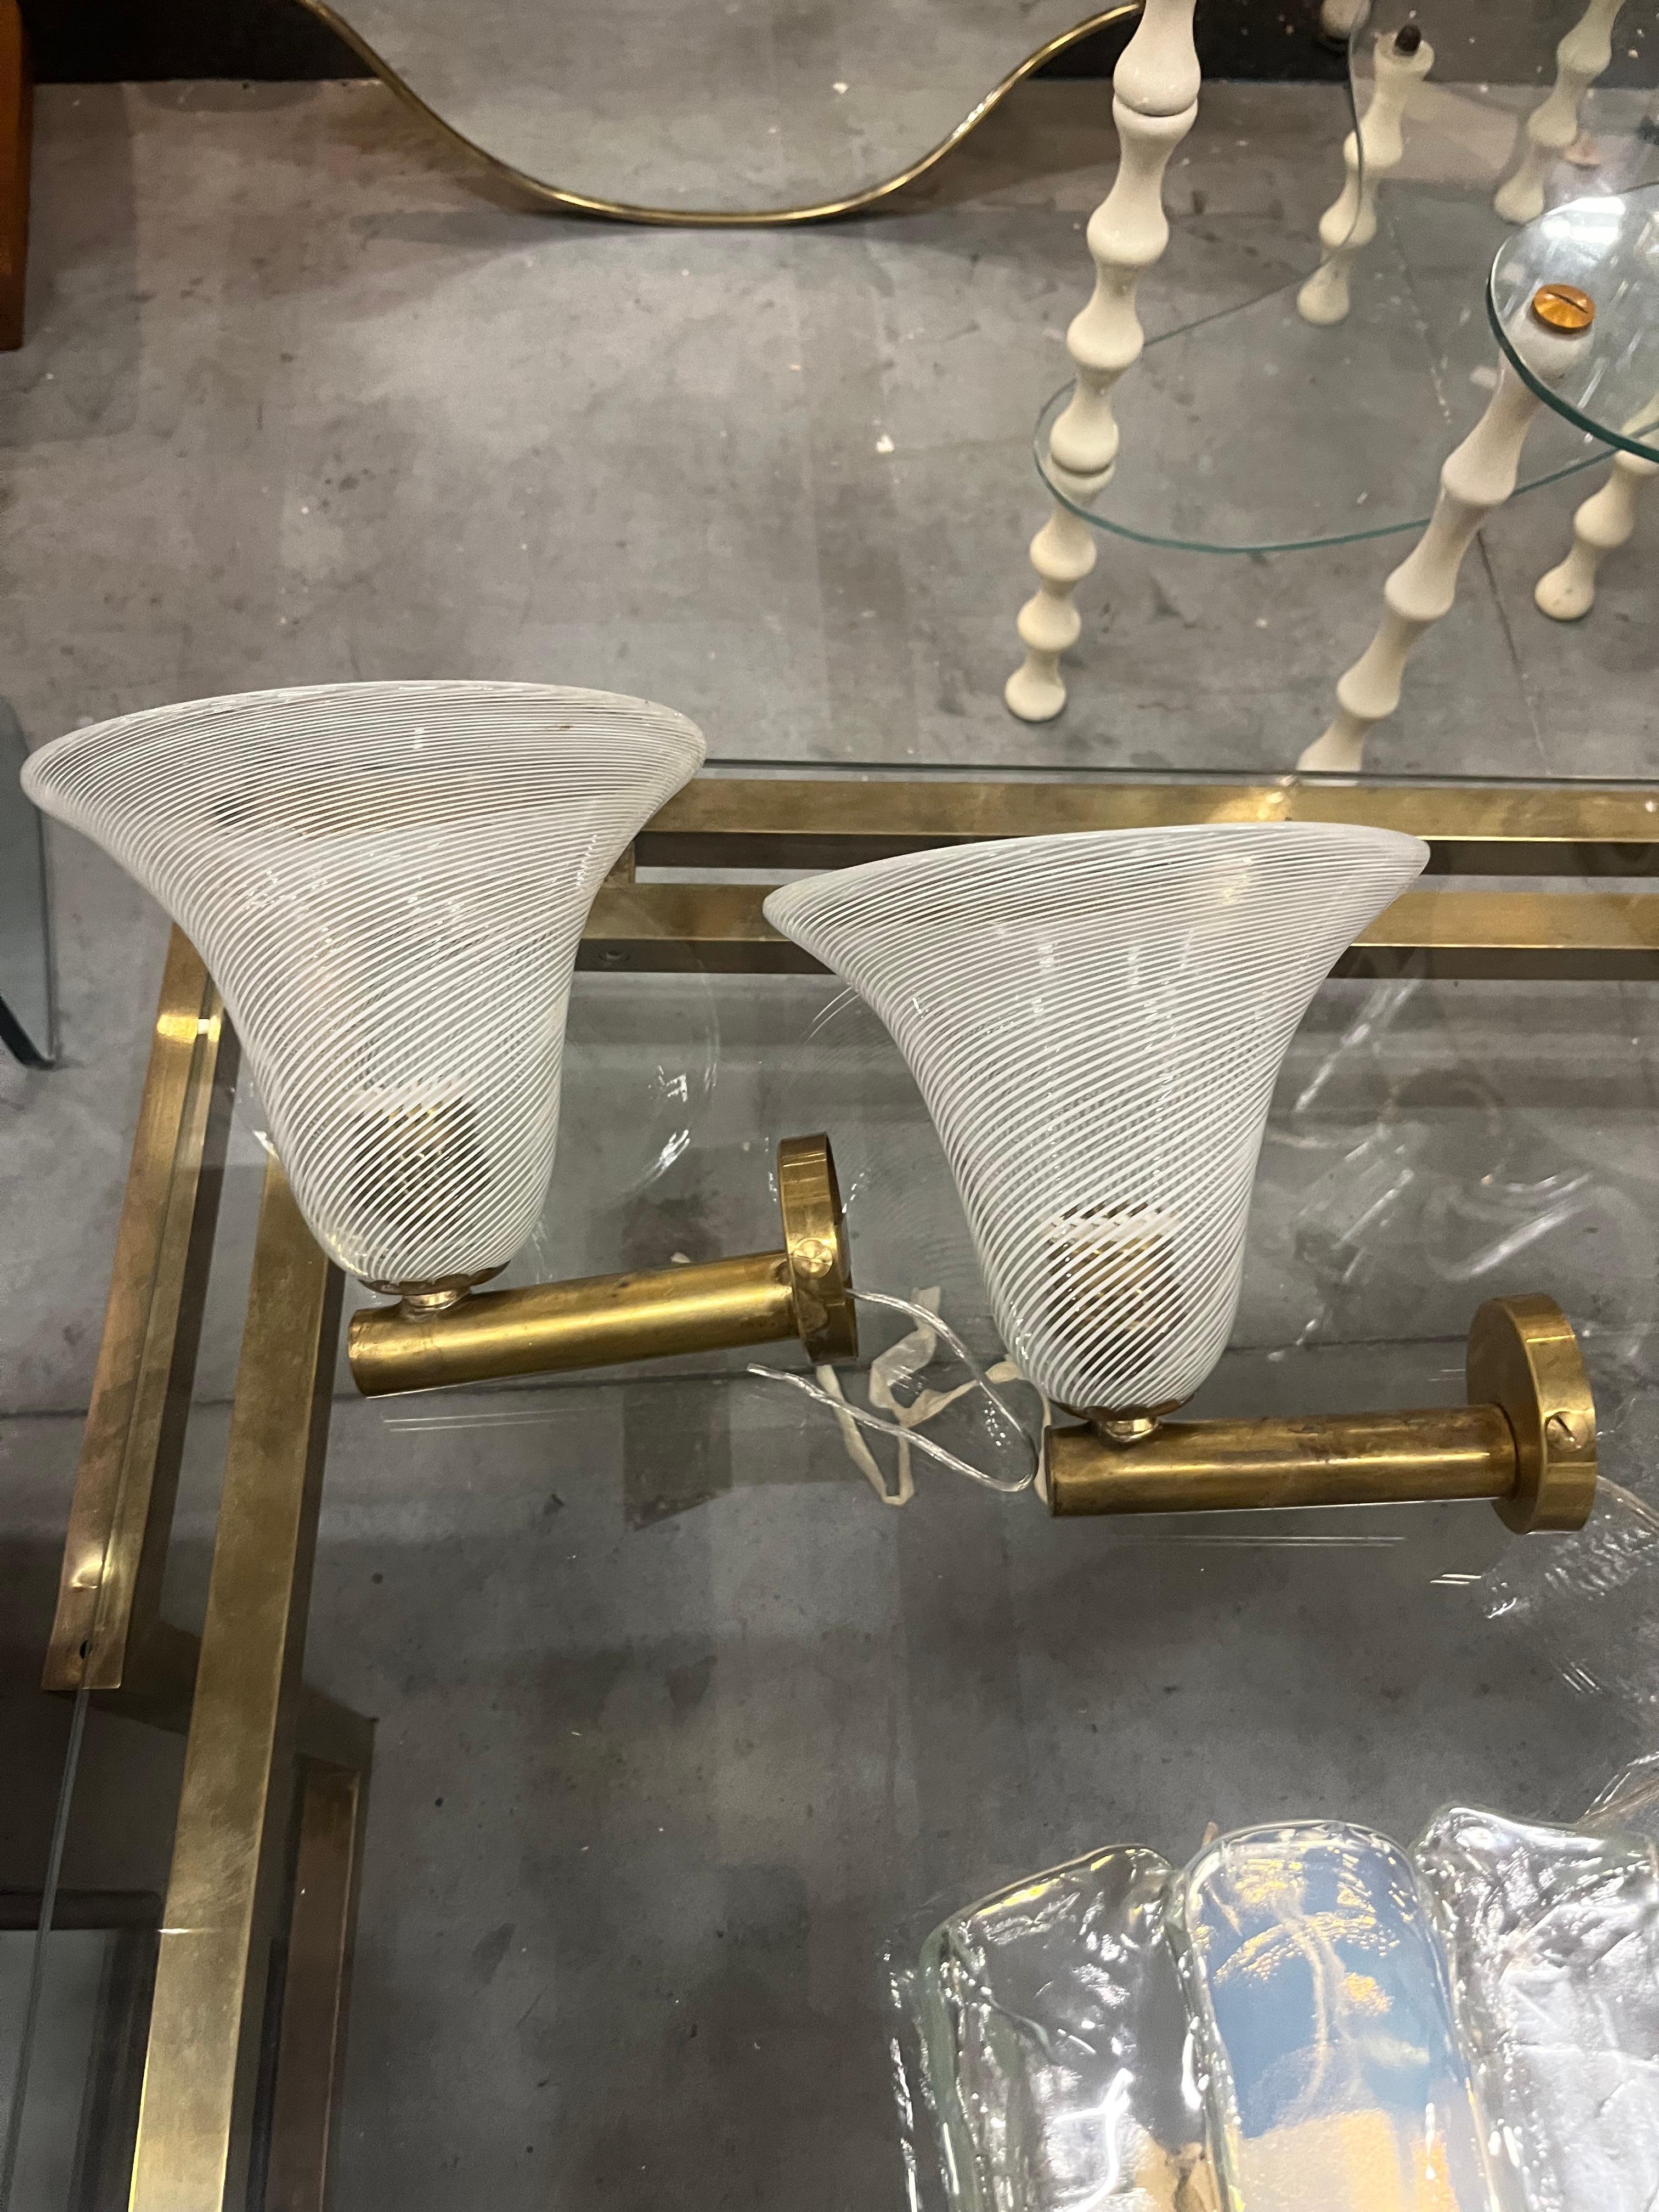 Pair of Venini wall sconces in meshed Murano glass and brass, 1940s
in good condition.
Brand new and functional electrical system.
Measures:
Bowl width  cm 18
Wall height 17.5 cm
Depth to wall cm 13